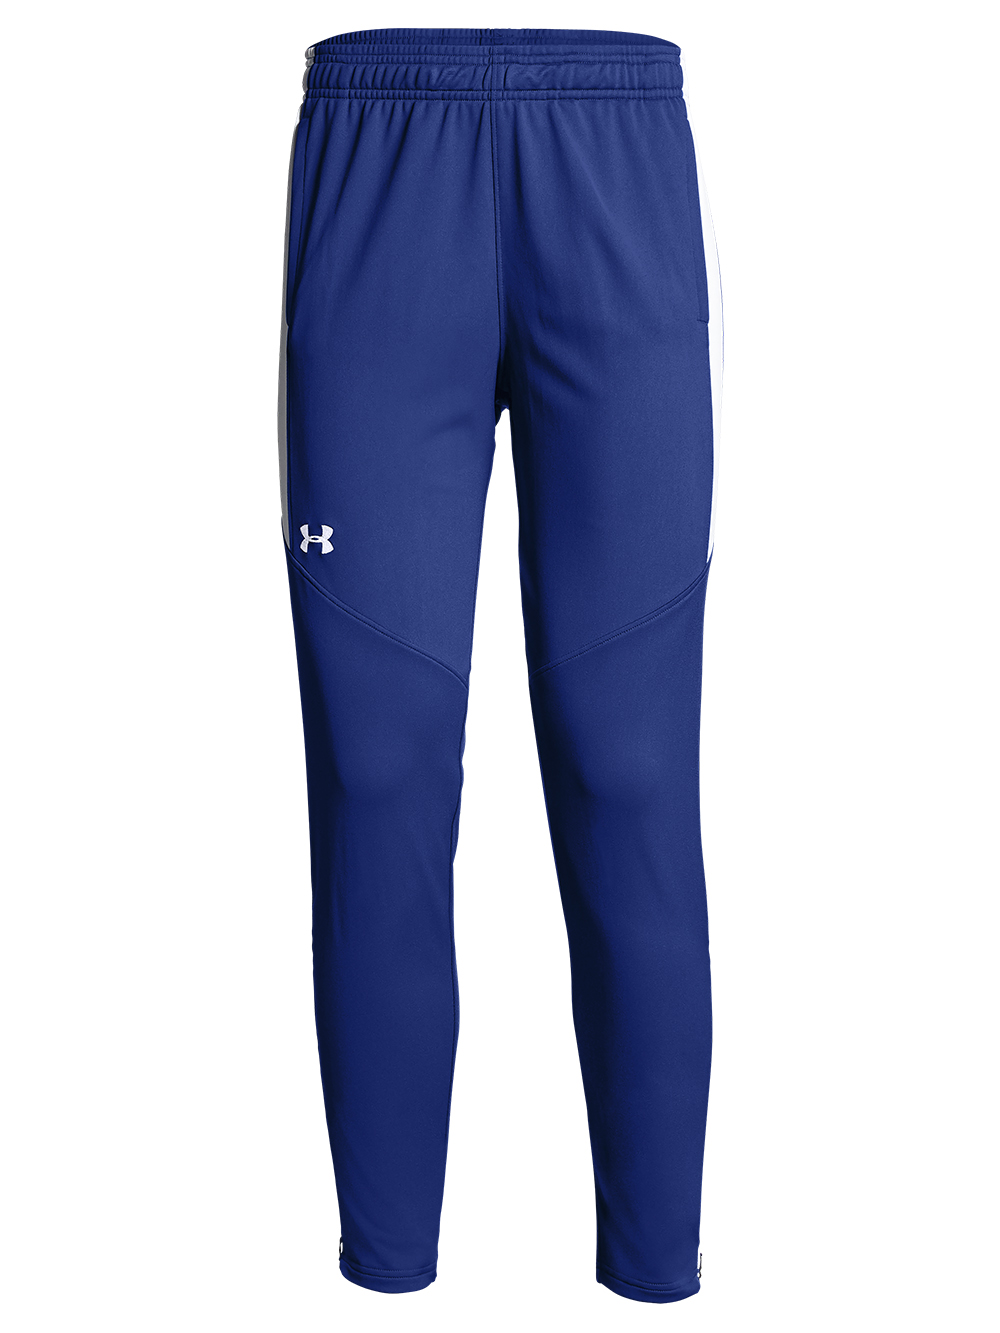 Under Armour Armourfuse® Knit Pant - Women's - Atlantic Sportswear